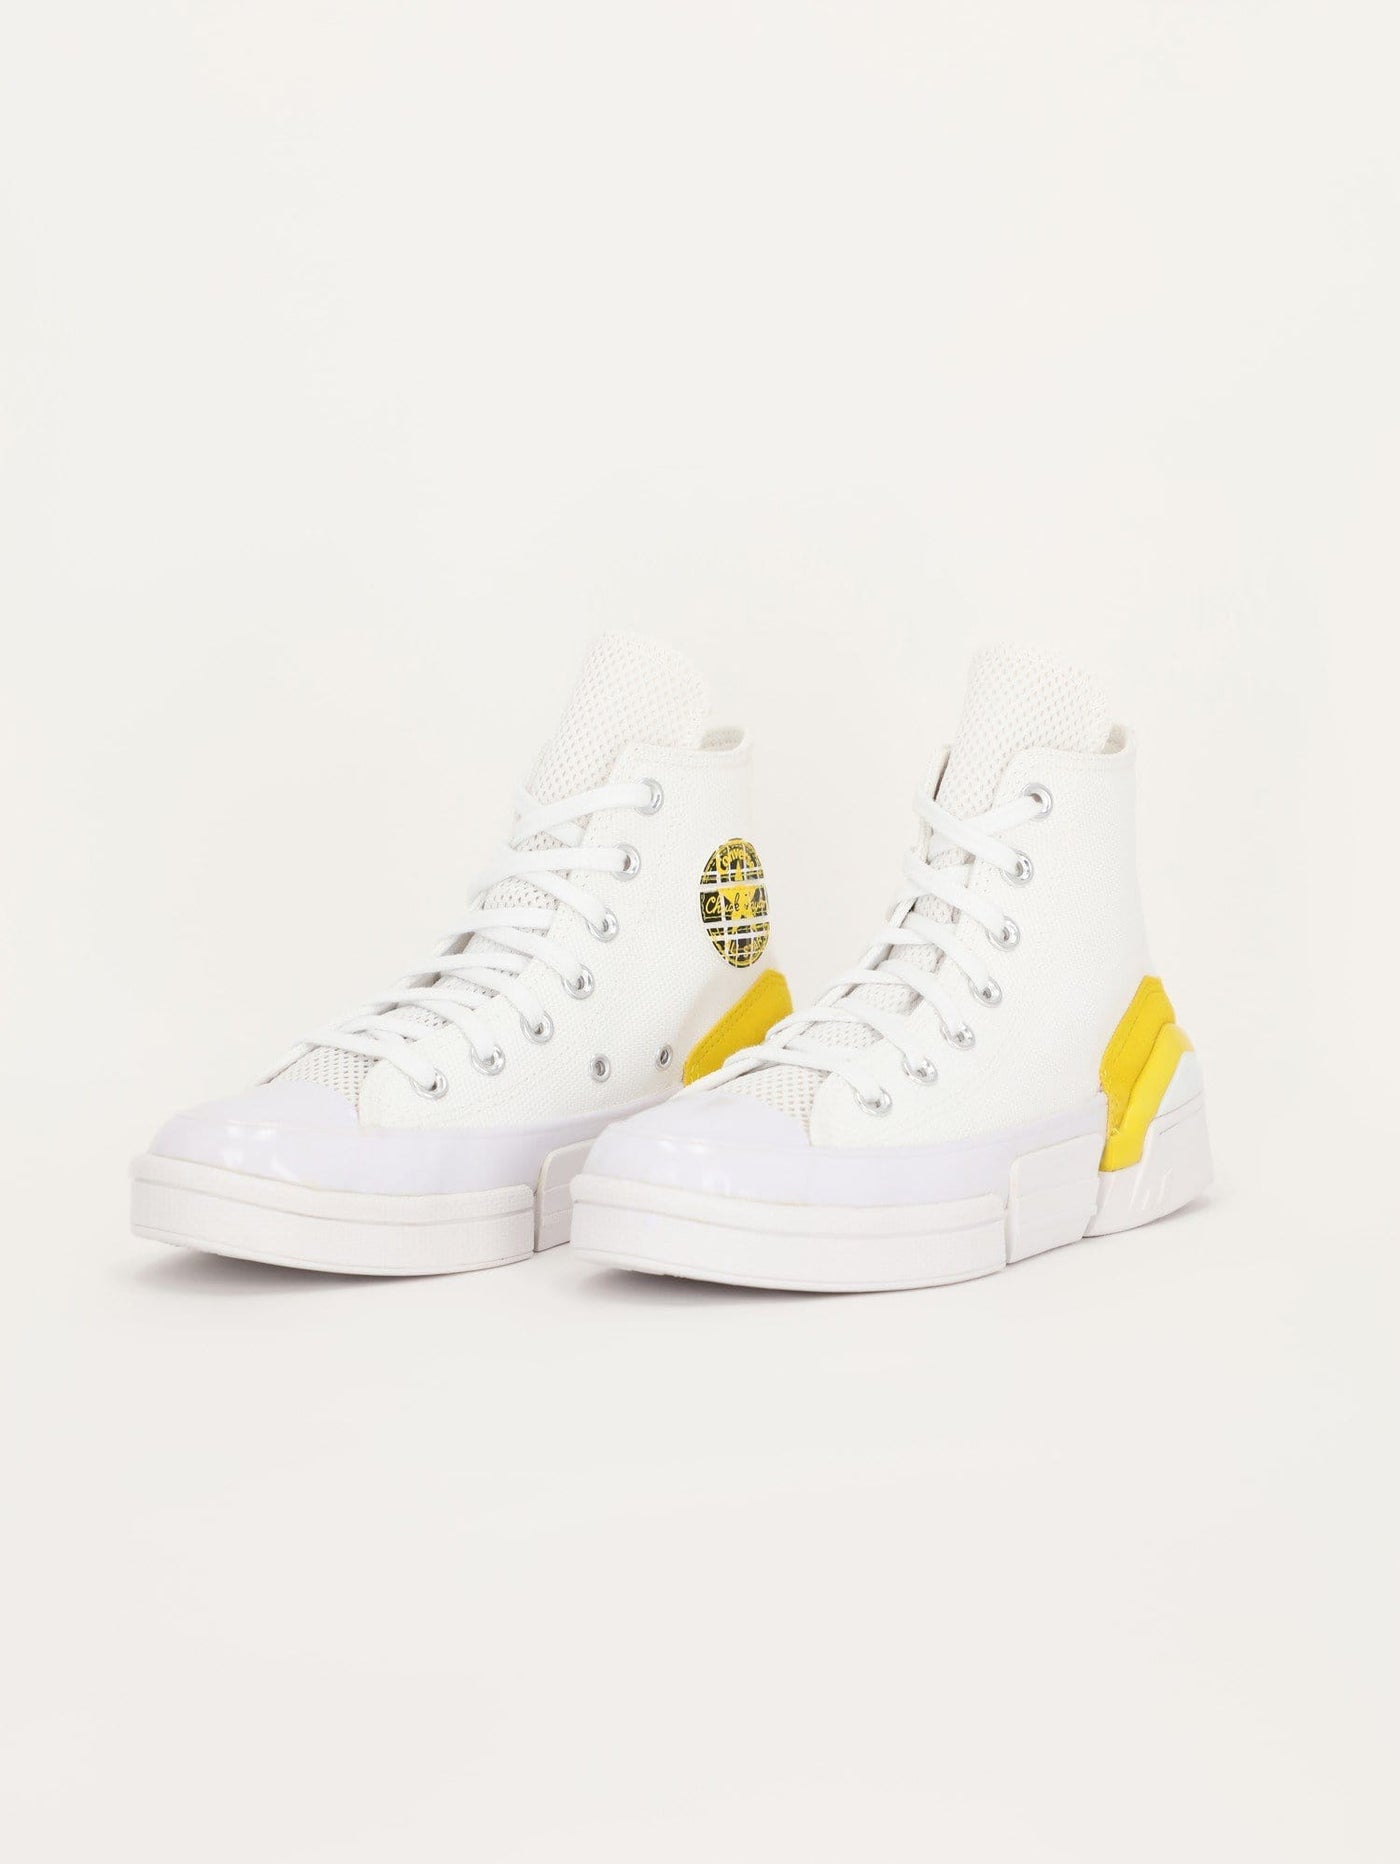 Converse Sneakers Mix and Match CPX70 High Top Sneakers - 568648C